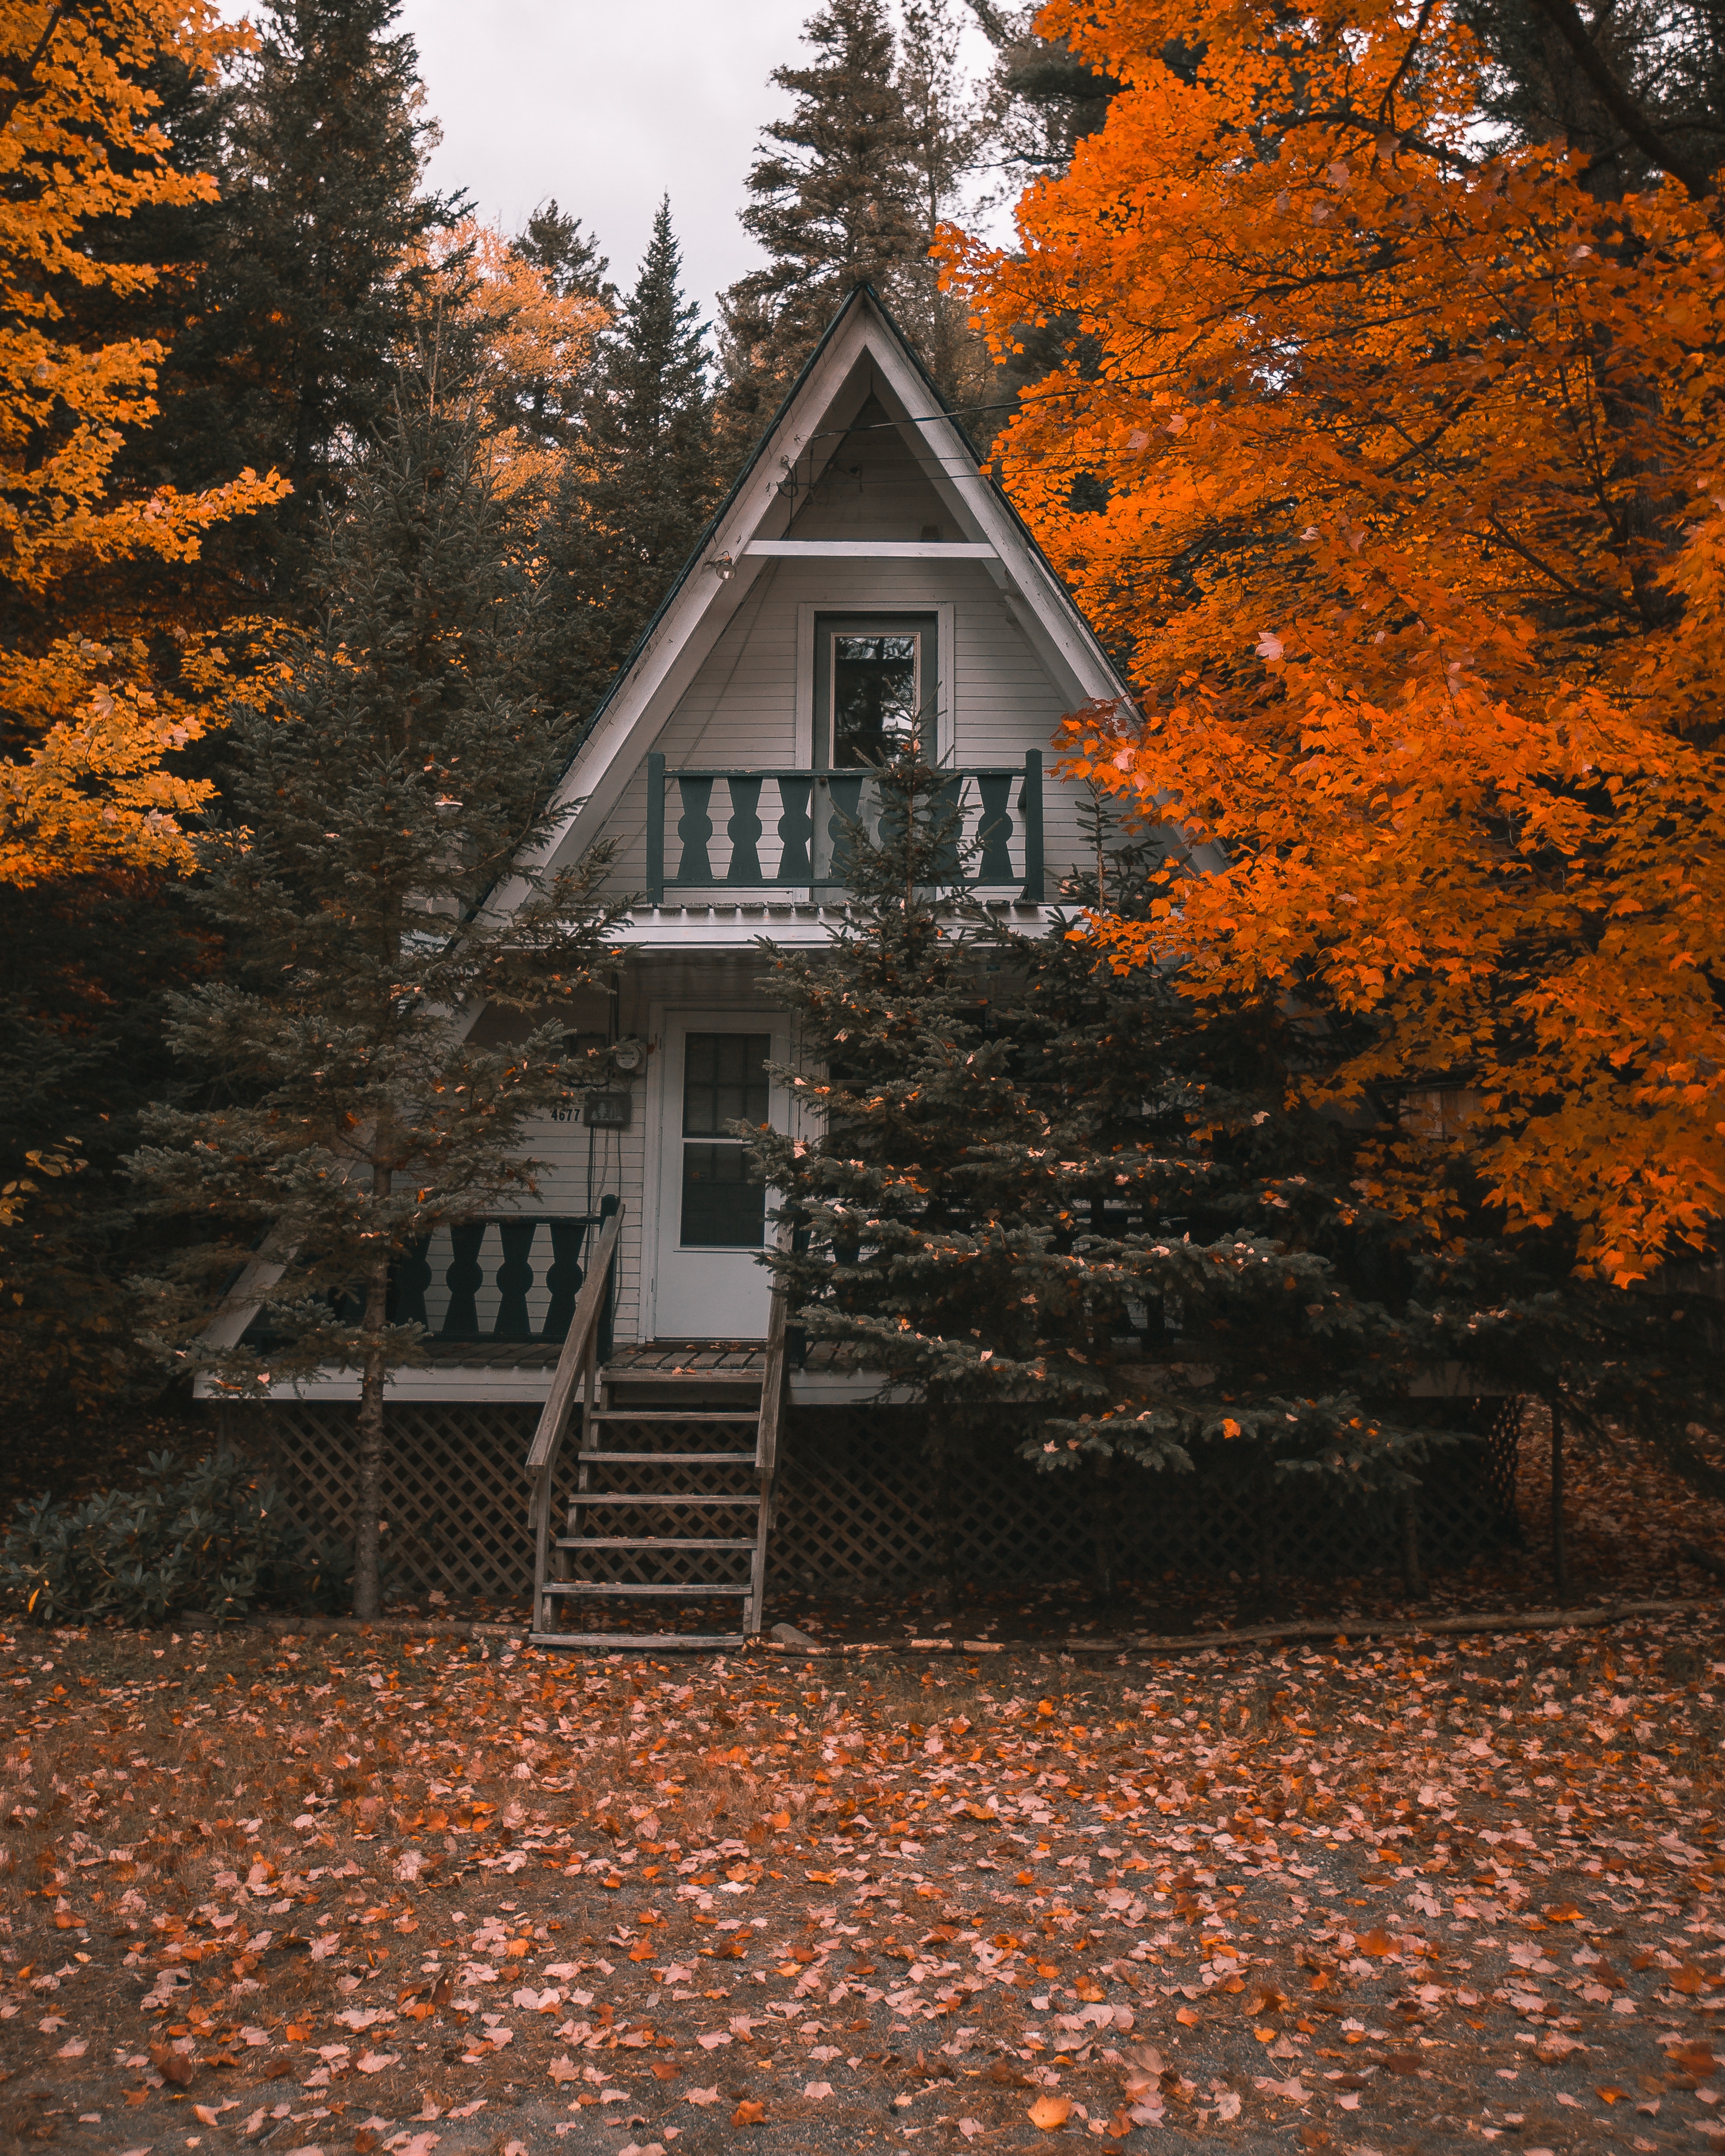 trees, autumn, small house, nature, privacy, seclusion, lodge, coziness, comfort